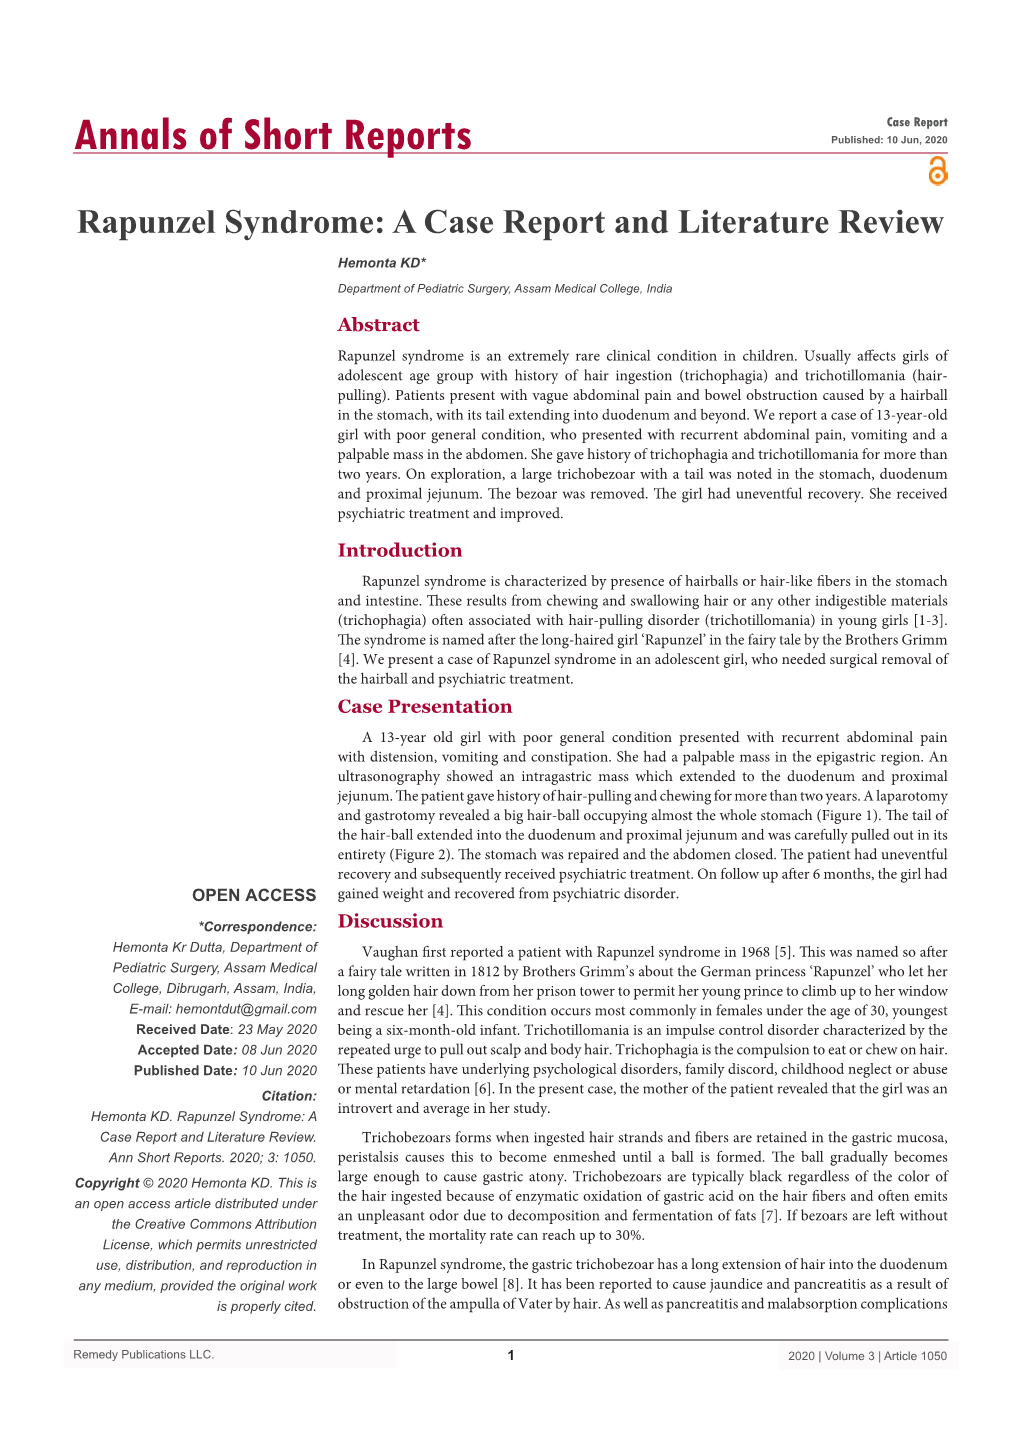 Rapunzel Syndrome: a Case Report and Literature Review